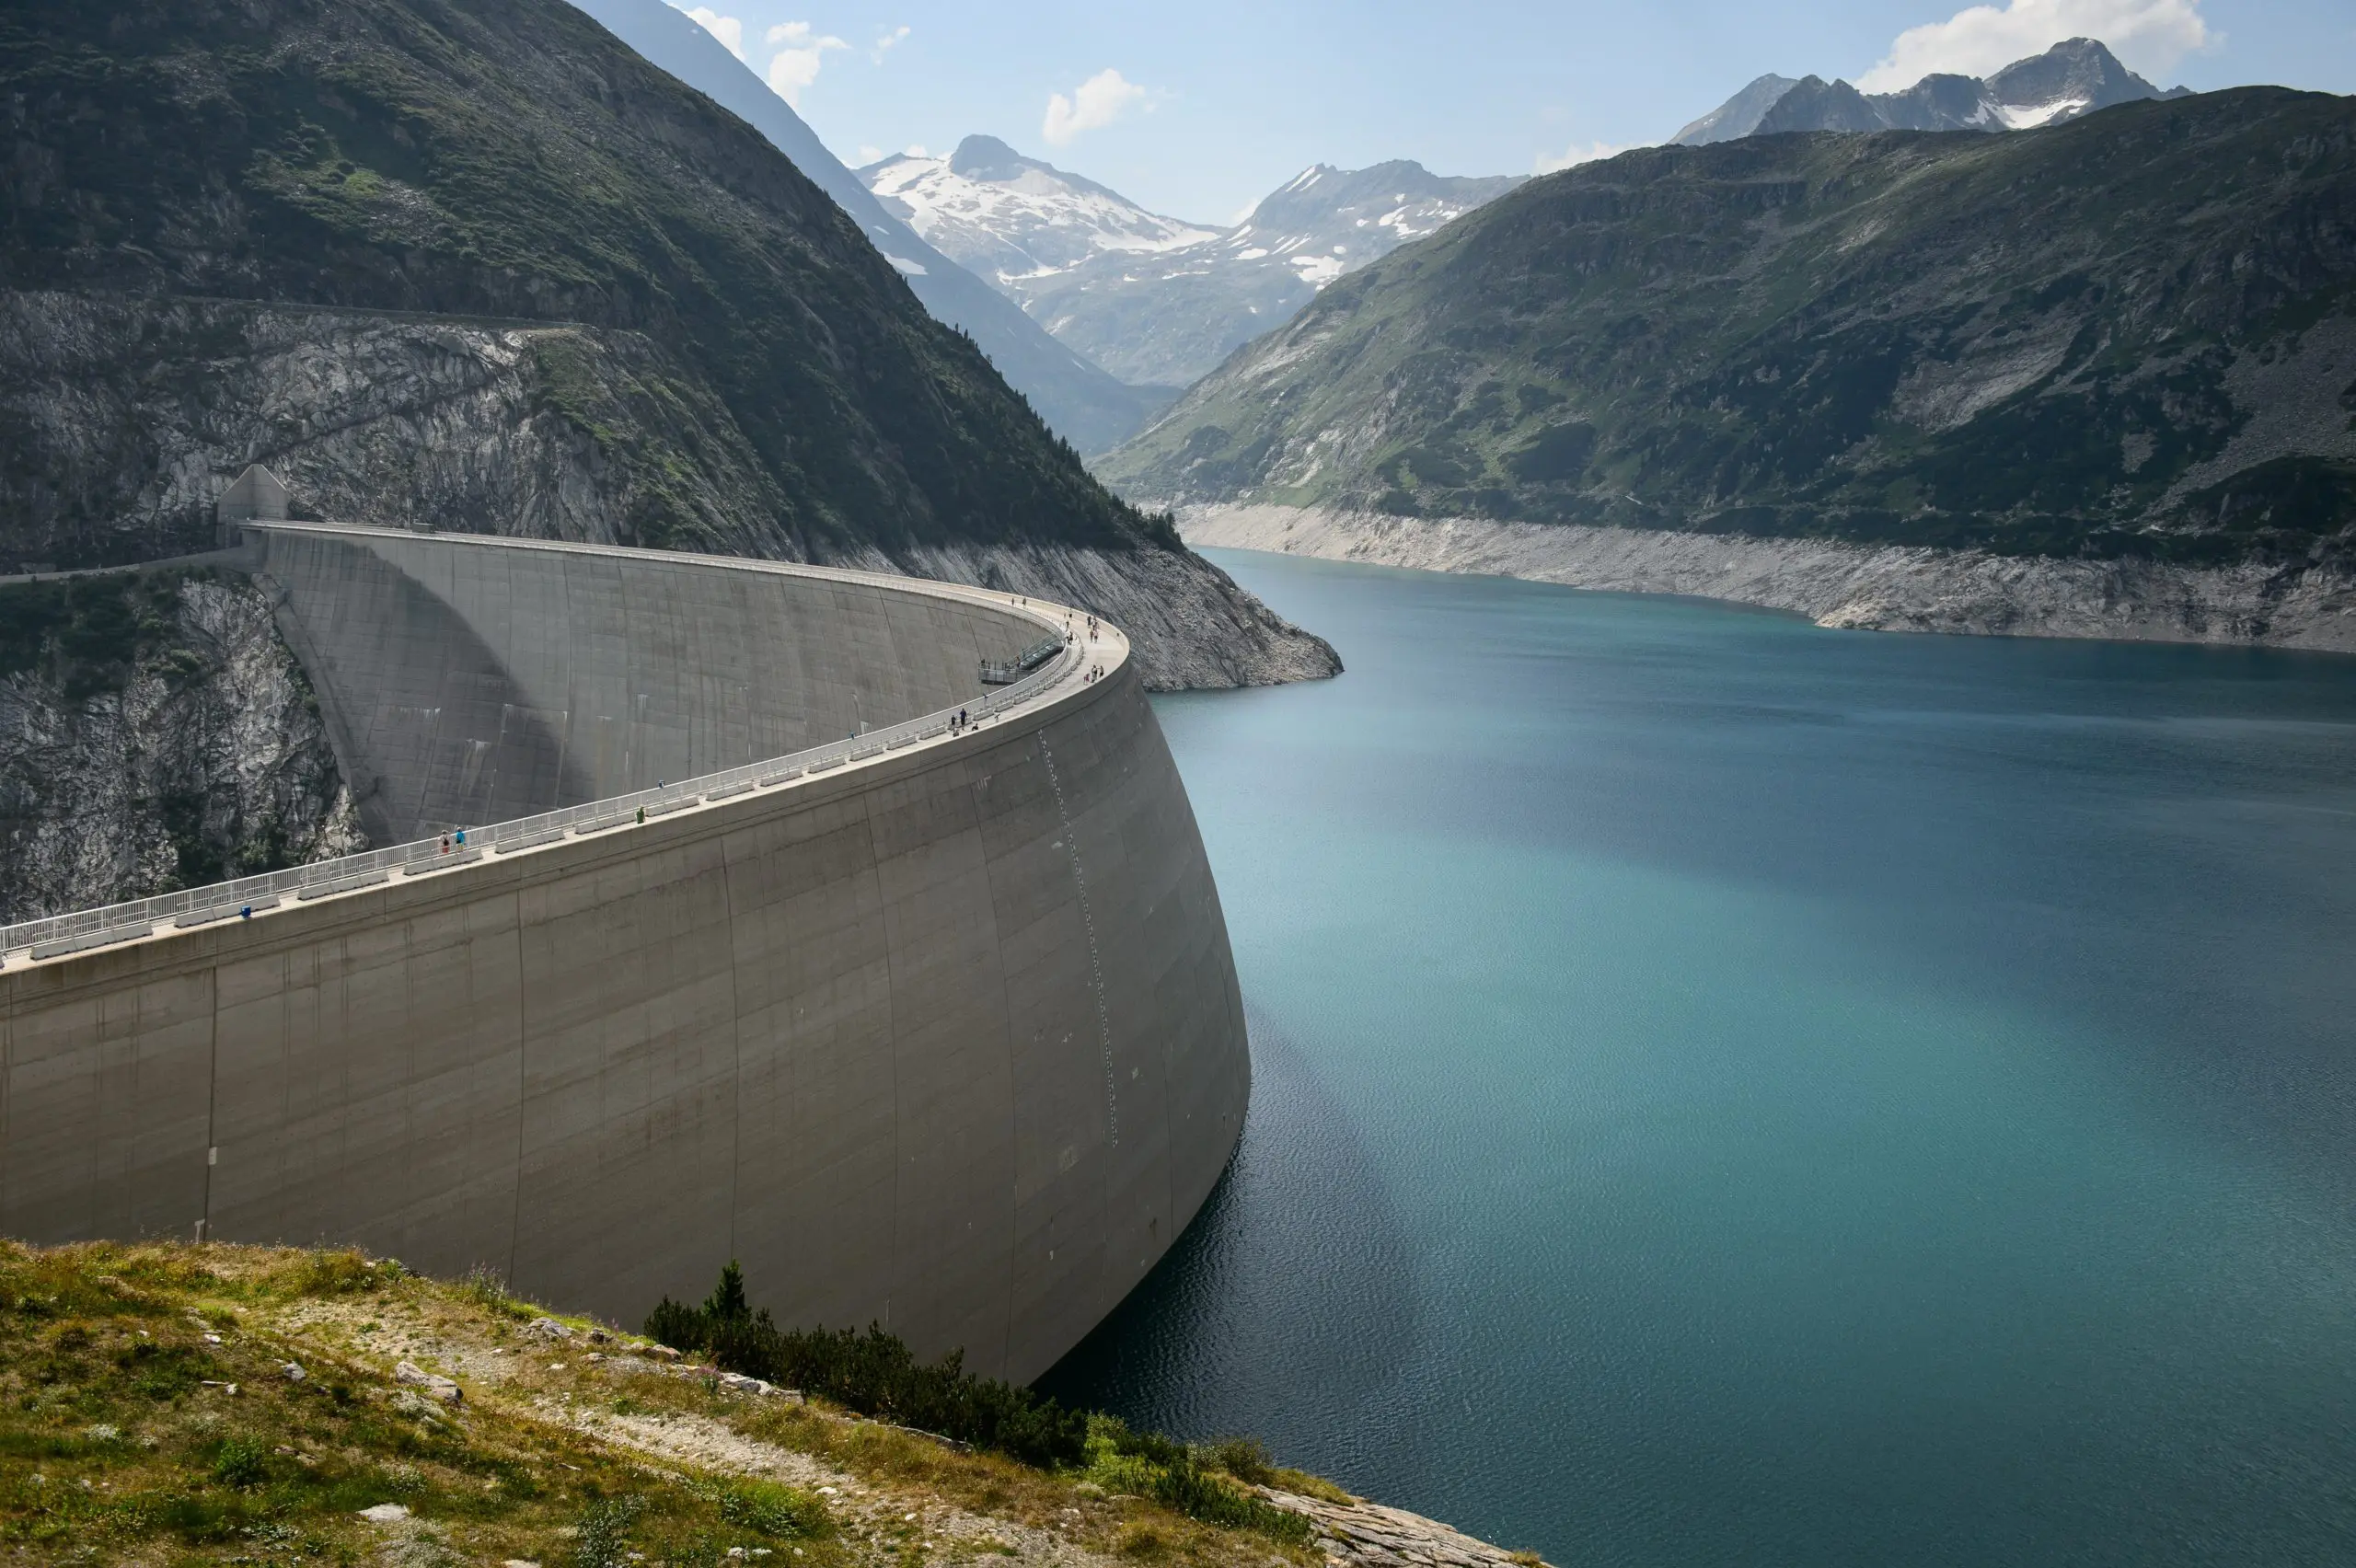 Picture of a dam in switzerland used on the mega menu of the website